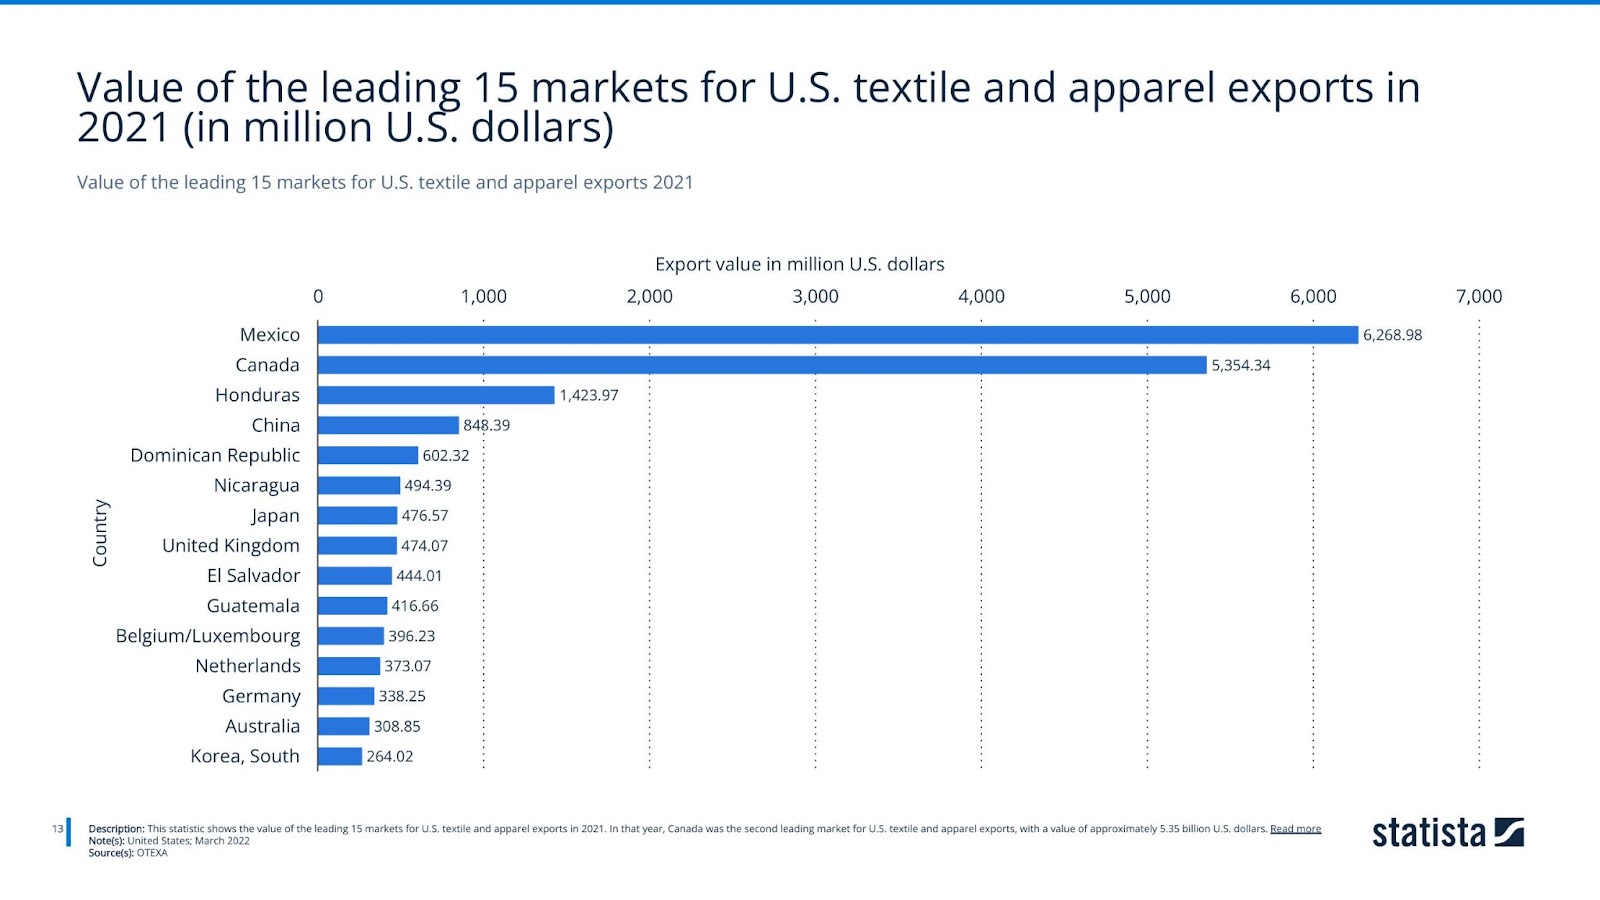 Value of the leading 15 markets for U.S. textile and apparel exports 2021